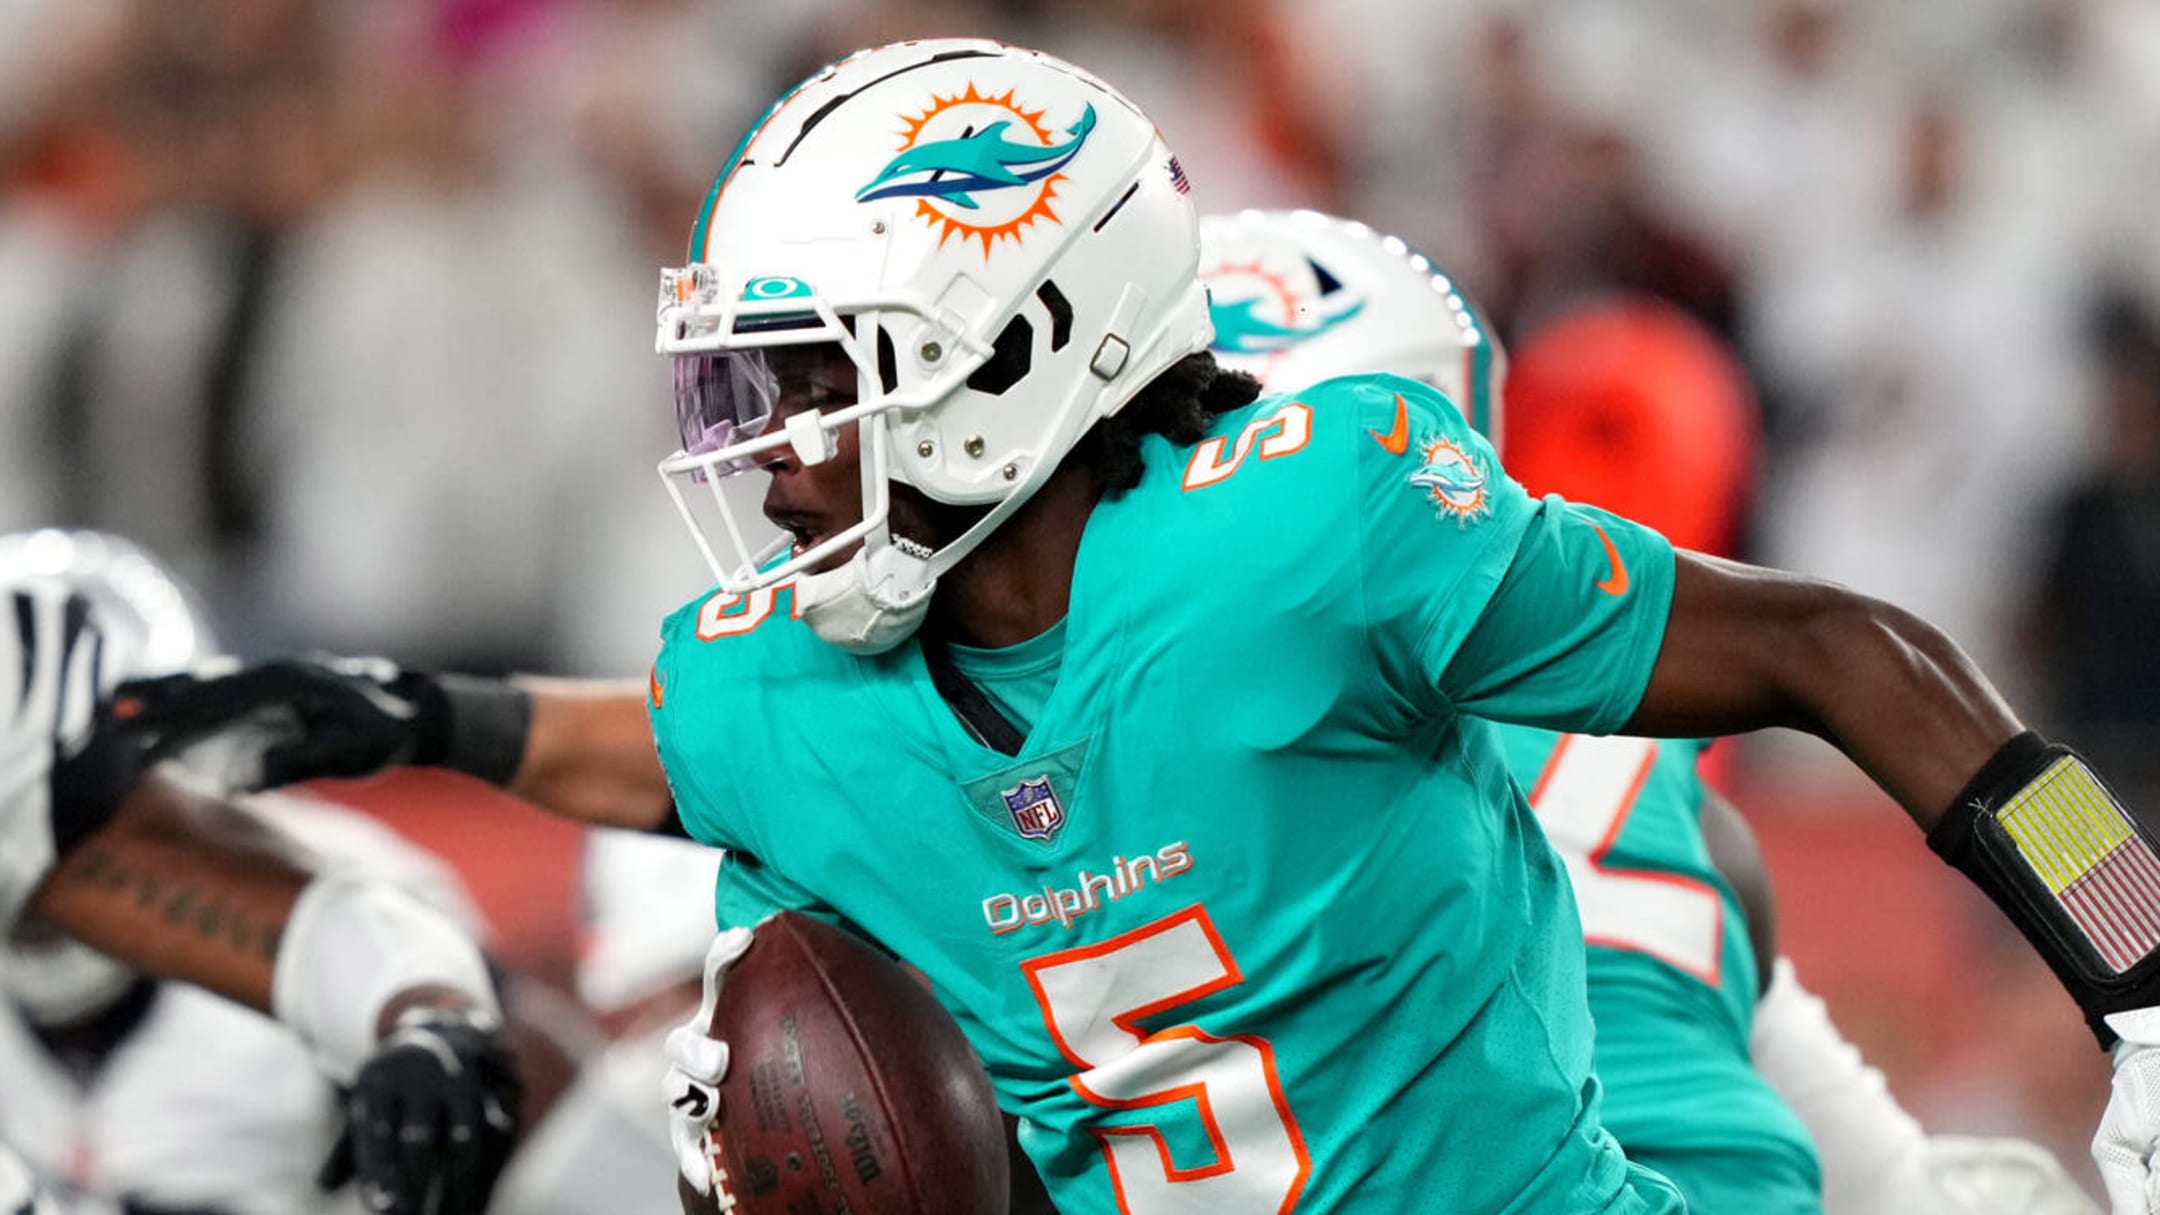 Can Teddy Bridgewater keep Dolphins in contention?